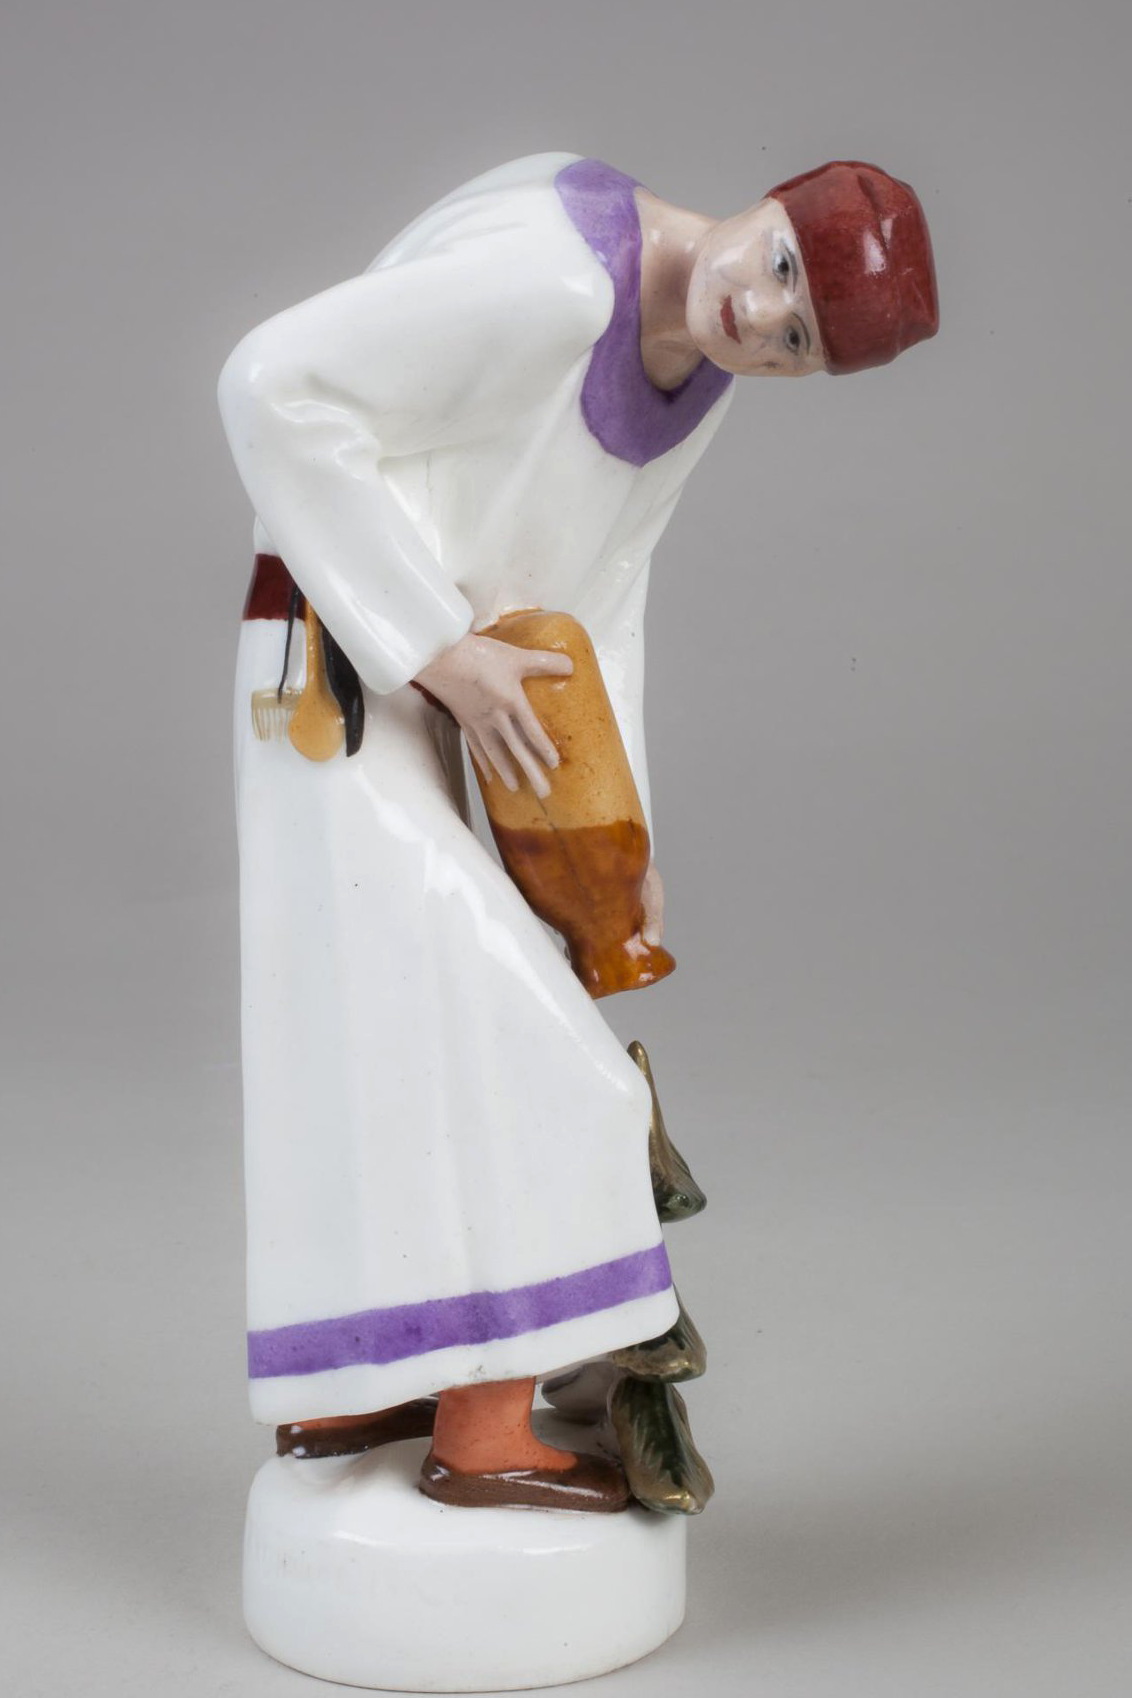 Russian Soviet porcelain figure January (Water carrier) from Zodiac Signs series by Vasily Kuznetsov in 1918